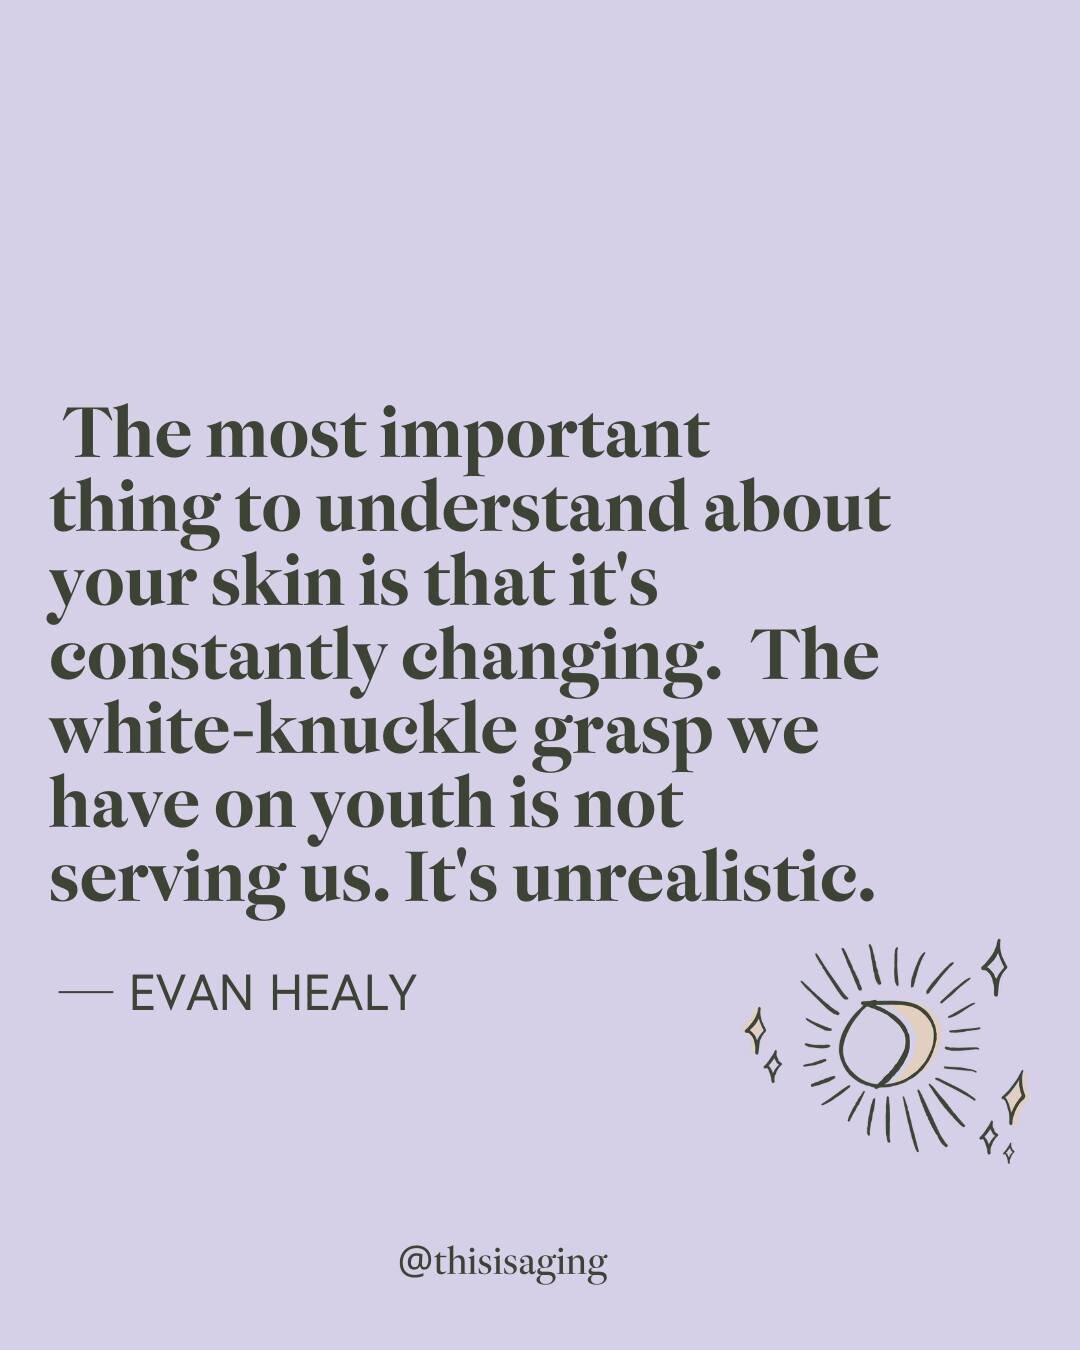 LOUDER FOR THE ONES IN THE BACK. 📣⁠
⁠
Thanks to Evan Healy (@braceletfolk) and founder of @evanhealy skincare for sharing her wisdom on embracing change as we age.⁠
⁠
For a manifesto on a holistic way of taking care of your skin that incorporates co